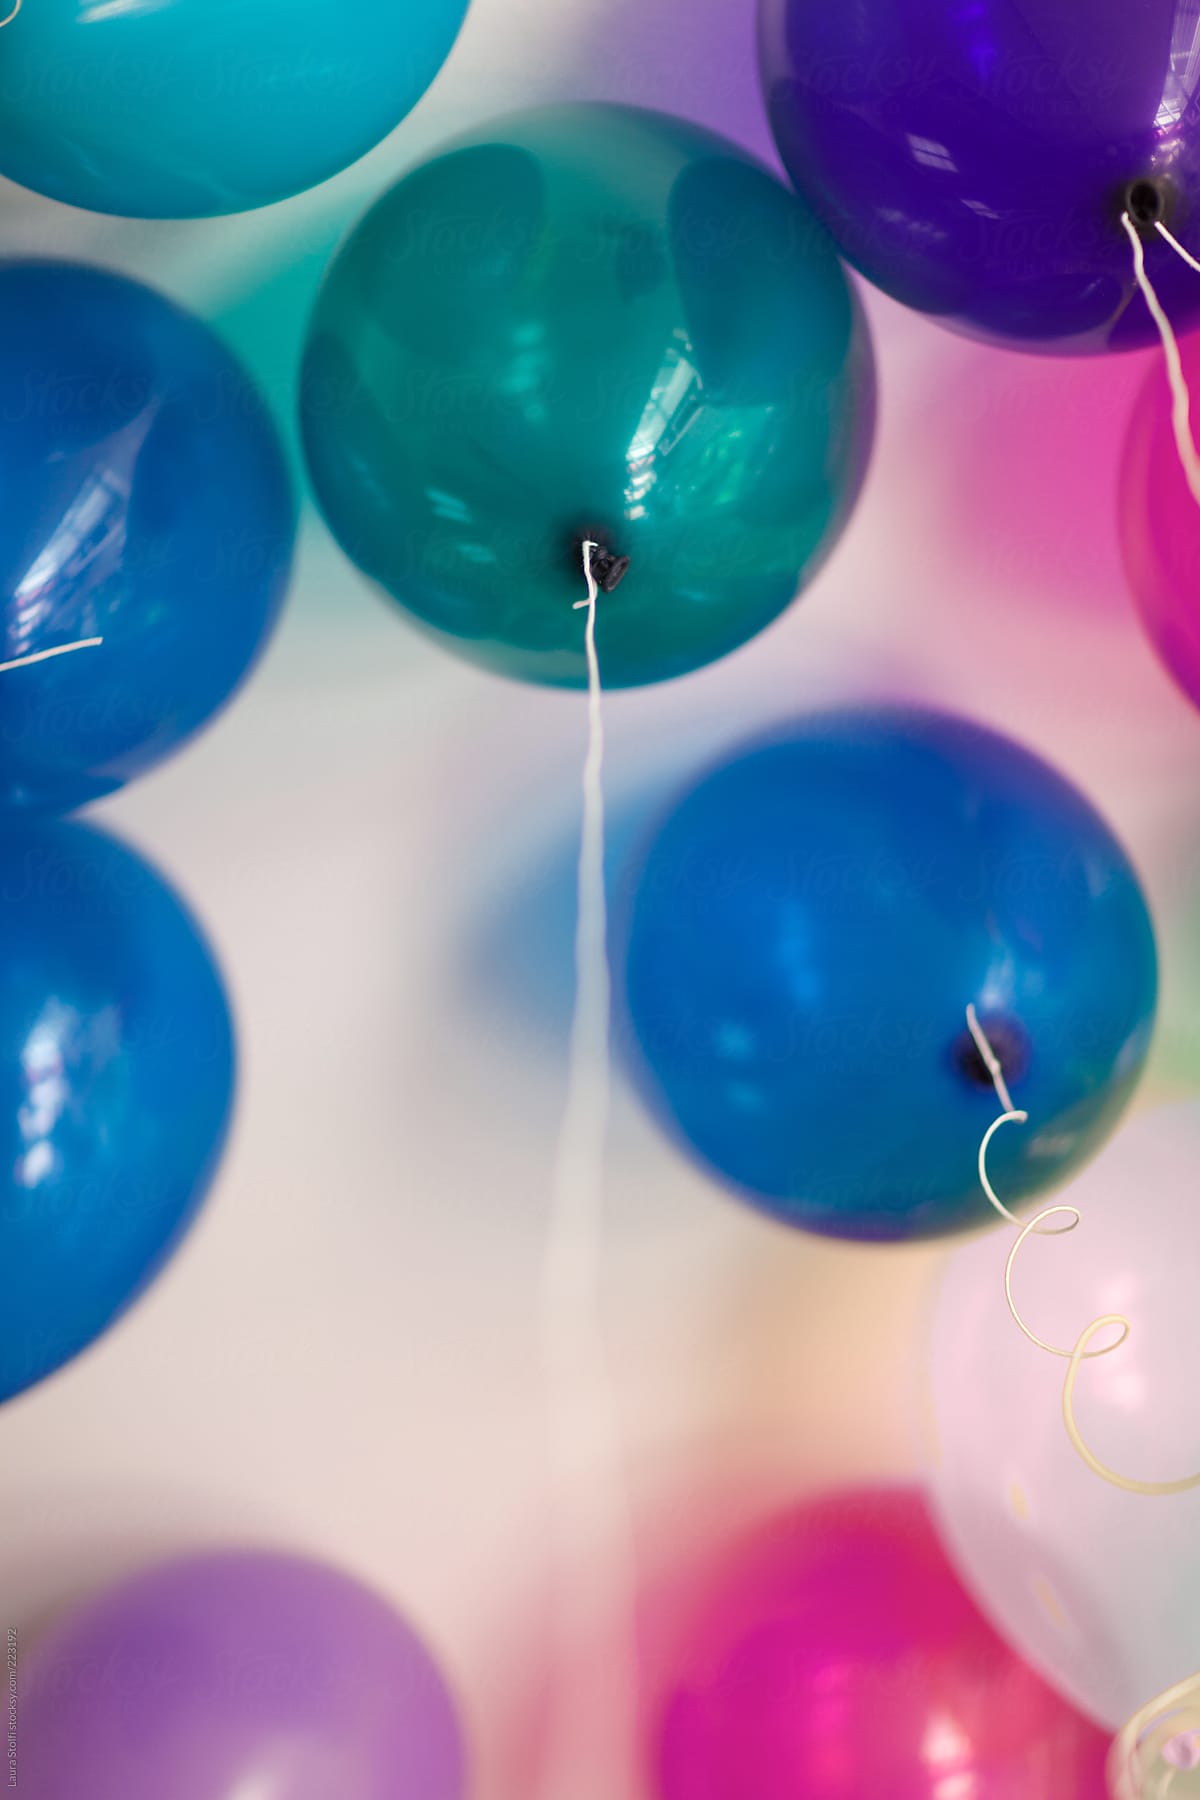 Blue, magenta, purple balloons floating and seen from below